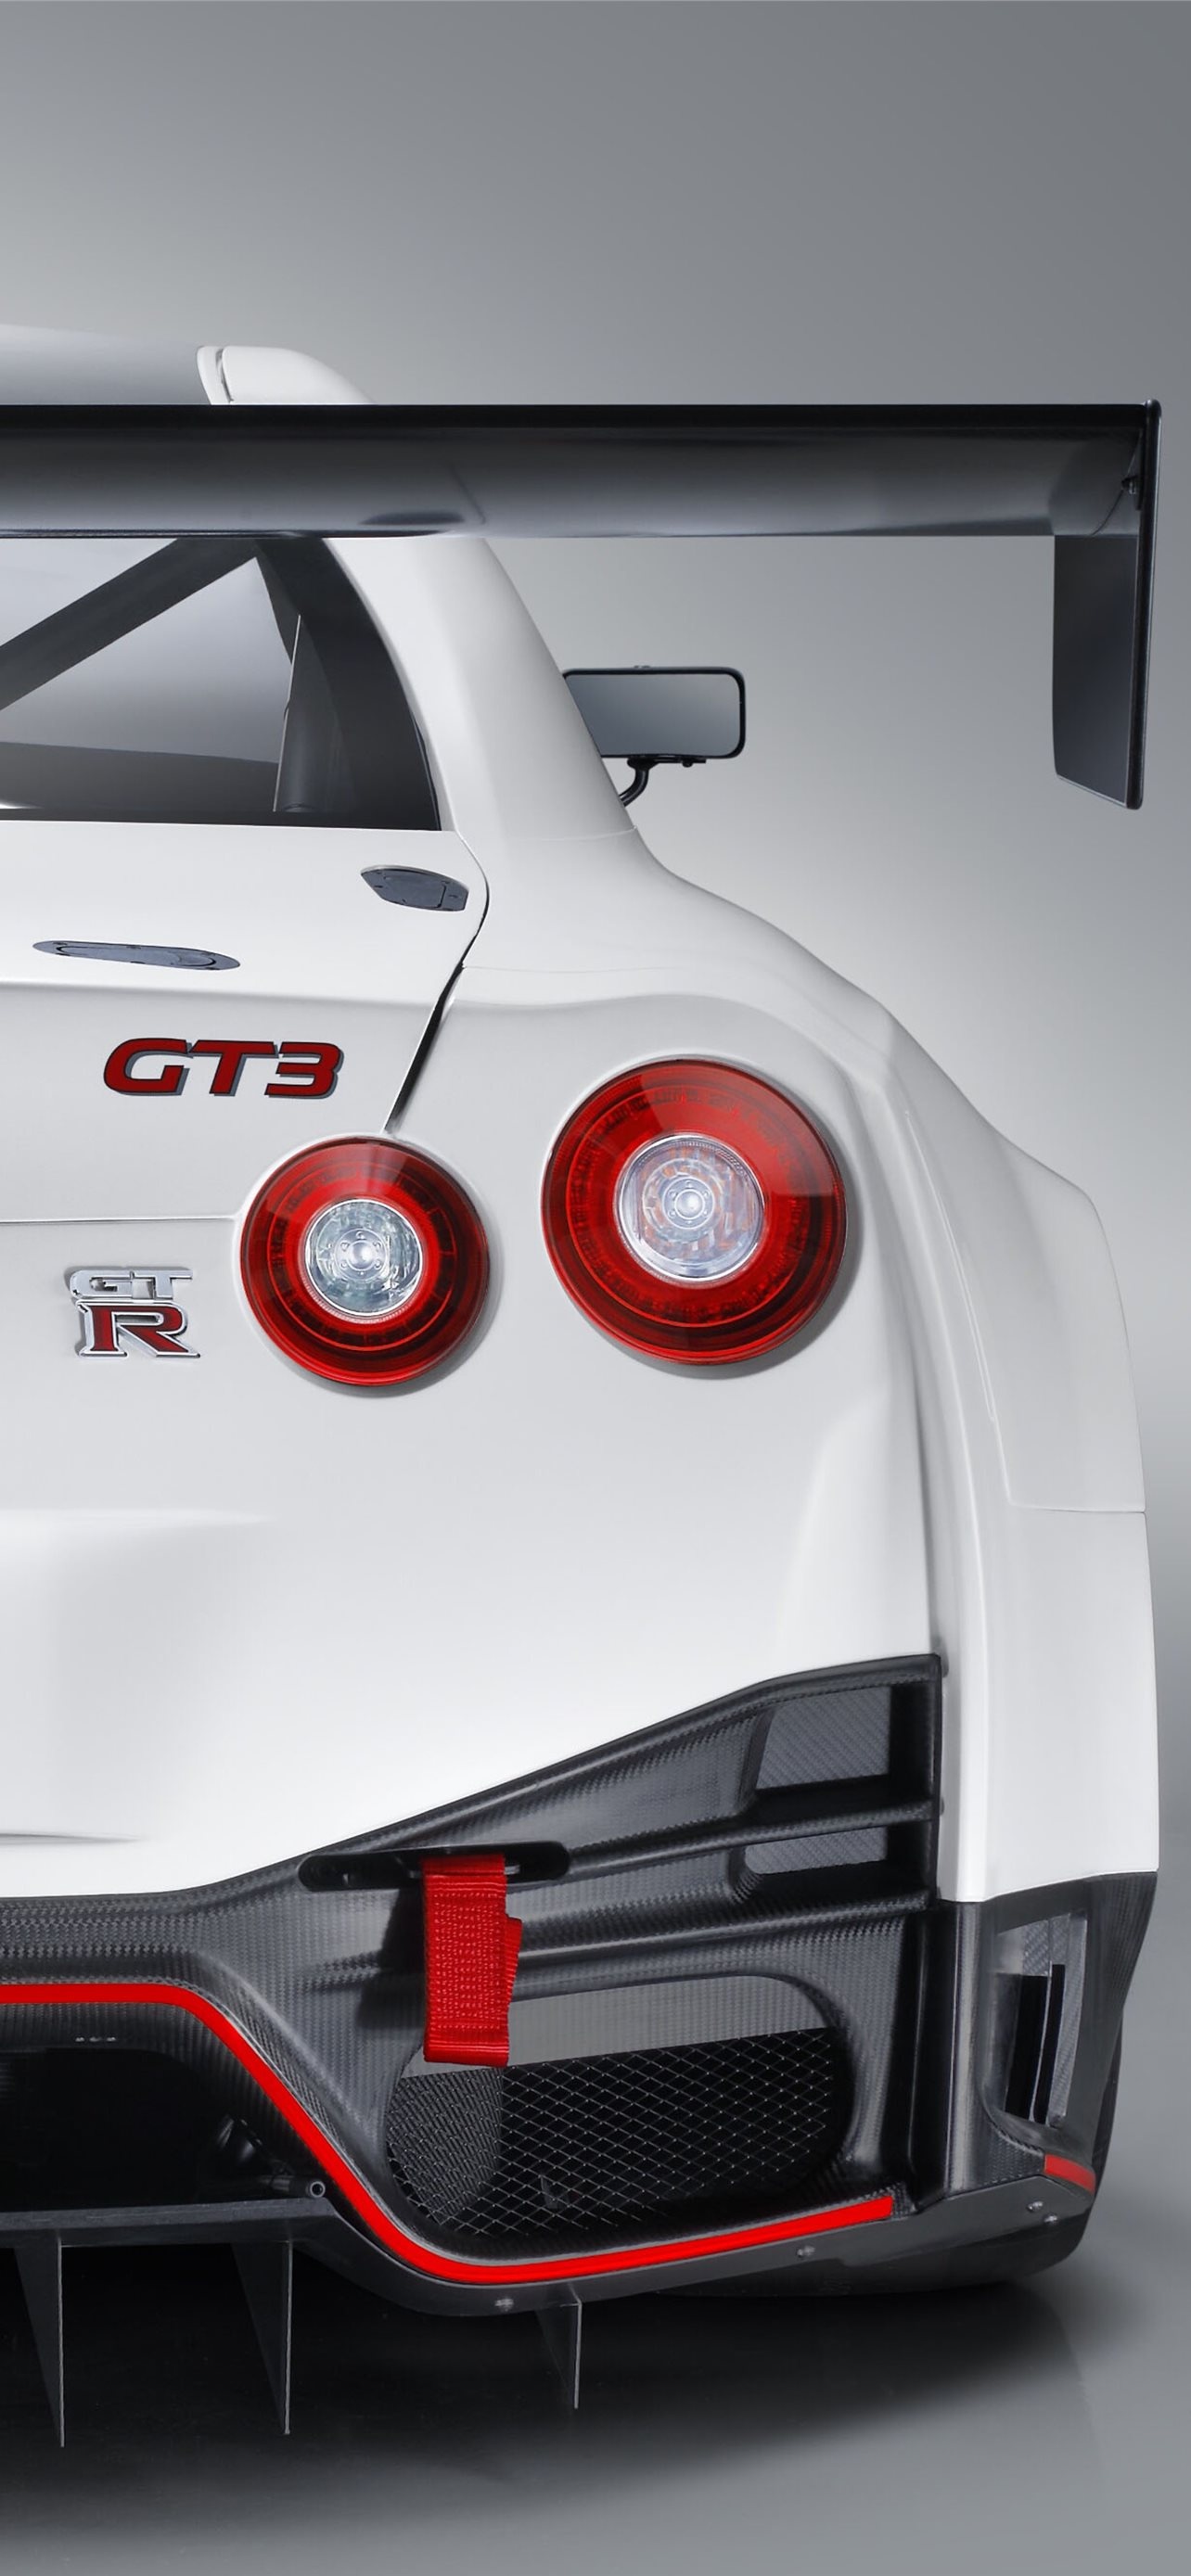 Nissan GT-R, Nismo power, iPhone charm, Captivating speed, 1290x2780 HD Phone